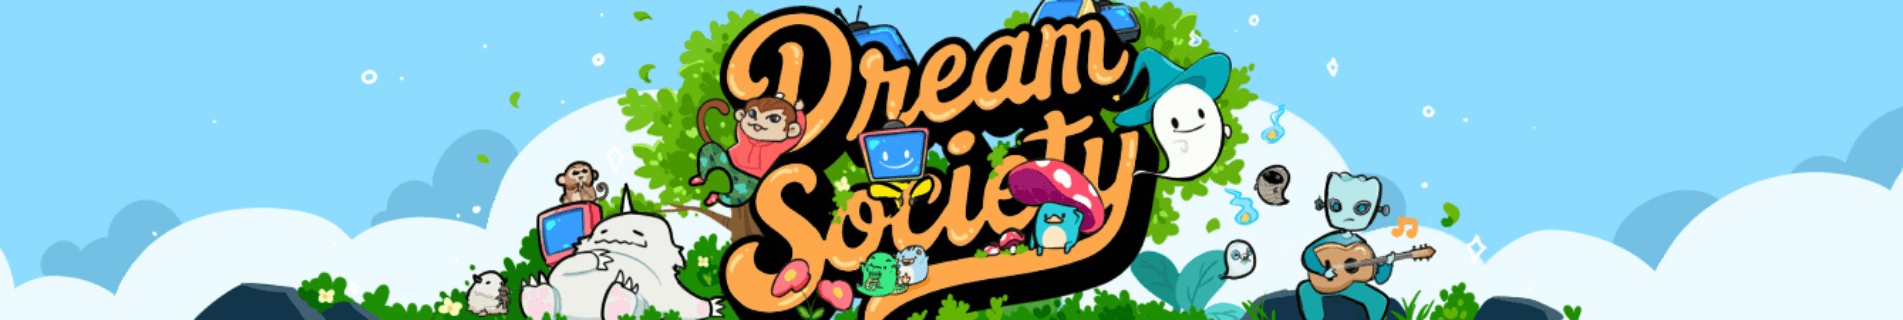 DreamSocietyNFT